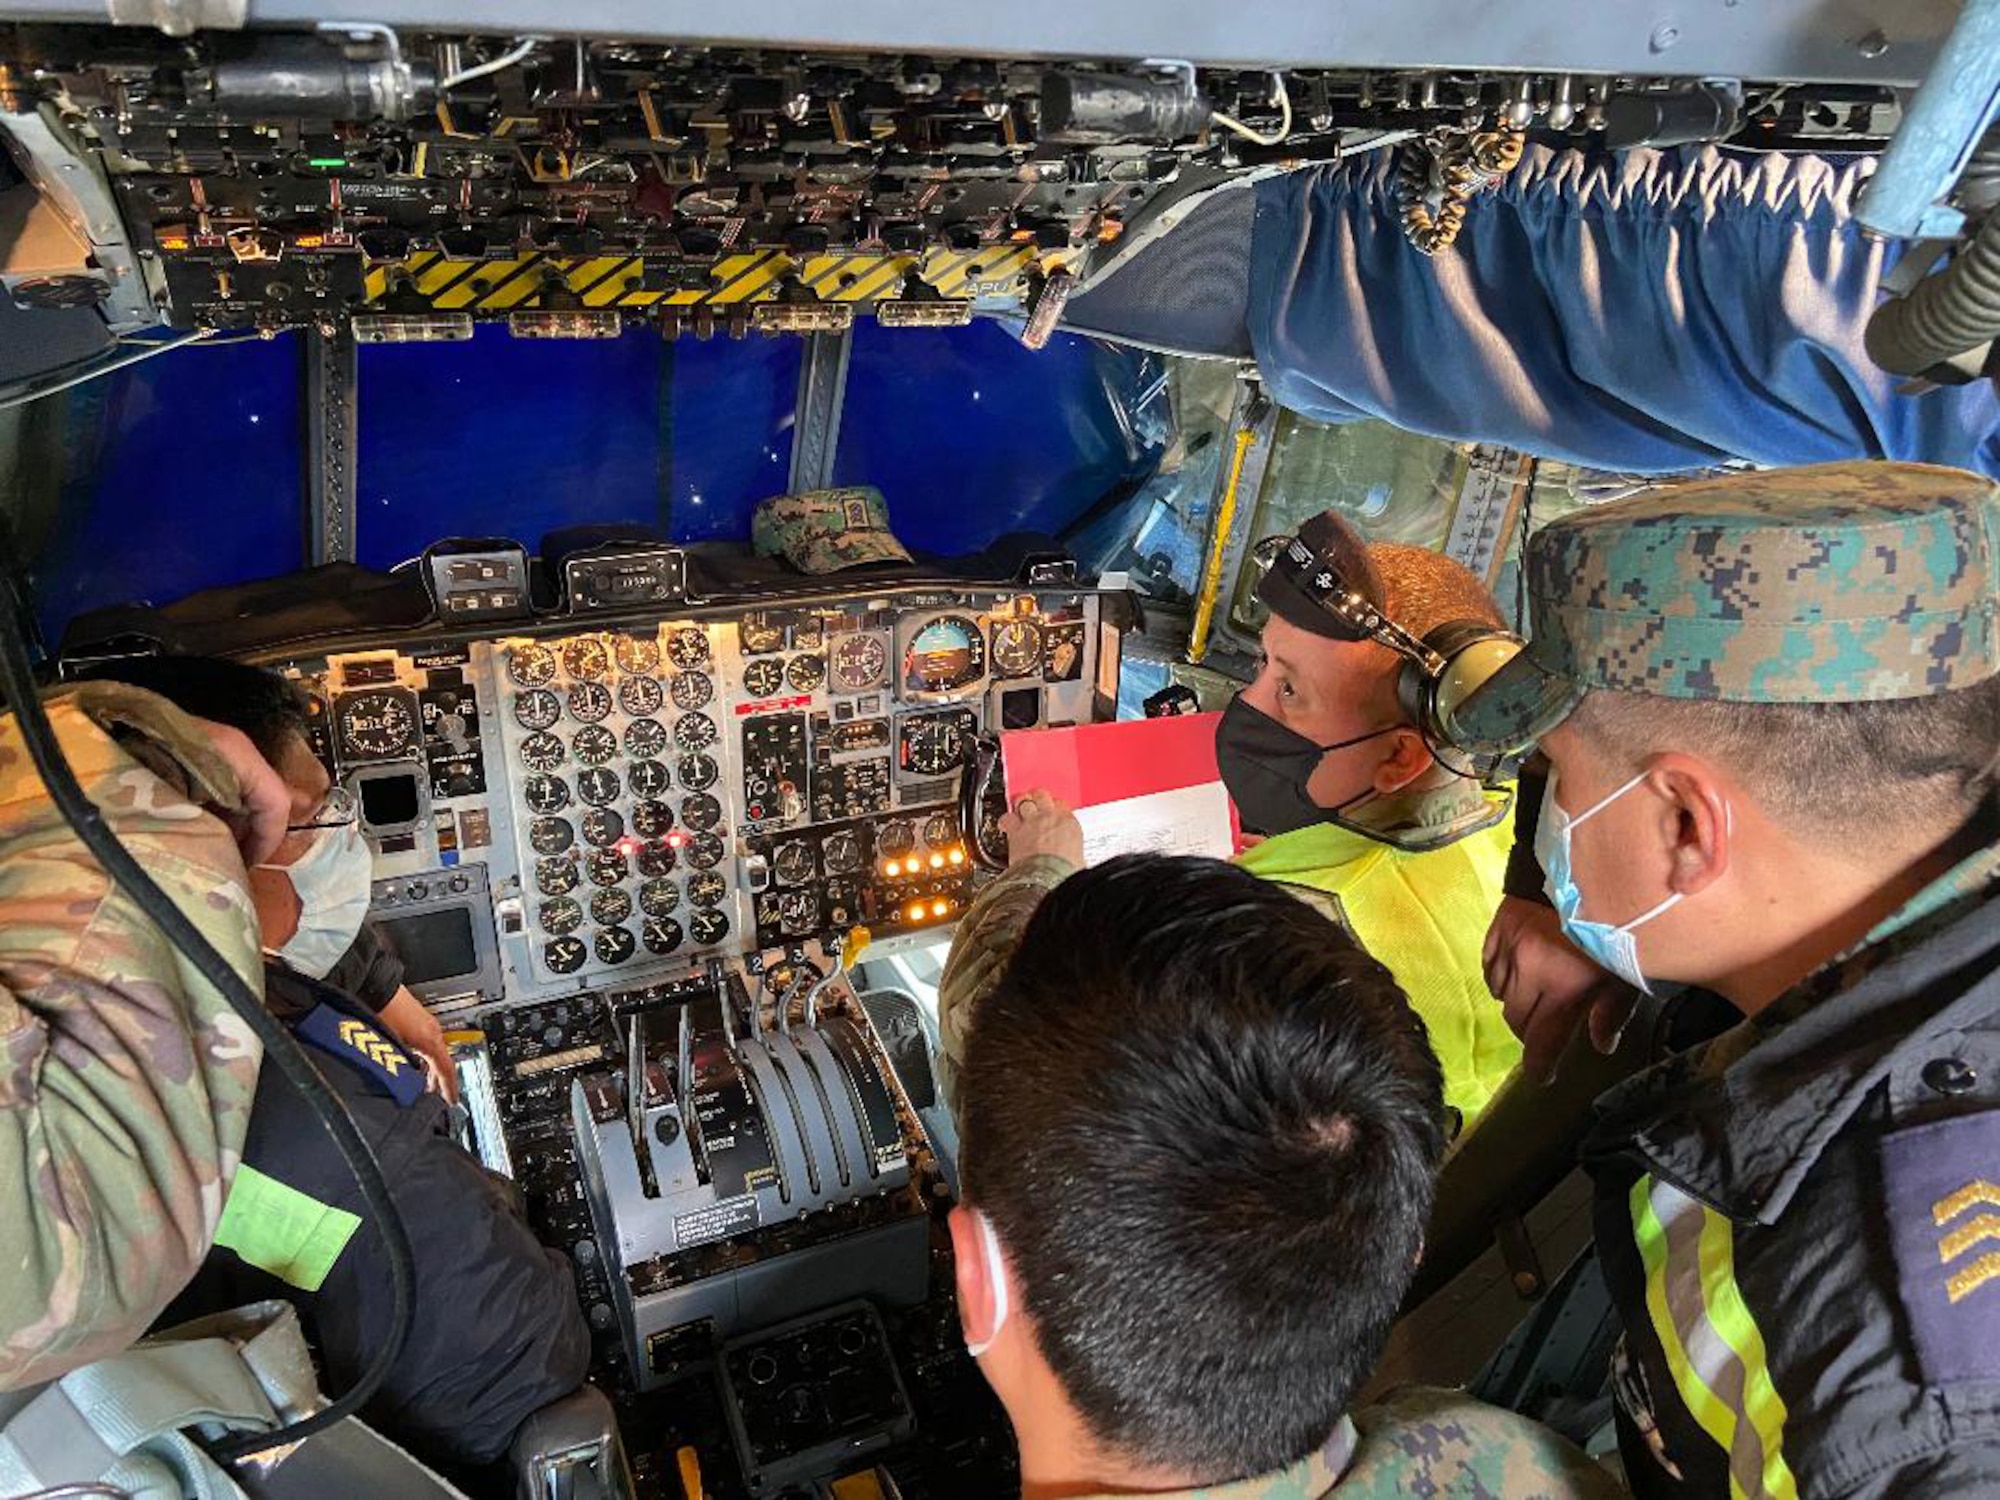 Three members of the Kentucky Air National Guard’s 123rd Maintenance Group visited Latacunga, Ecuador, May 3 to 8, 2021, to provide aircraft maintenance training to the Ecuadorian Air Force as part of the National Guard’s State Partnership Program. The team focused on hydraulics, electronics, avionics, propulsion, and structural and fuel-system maintenance. (Courtesy photo)